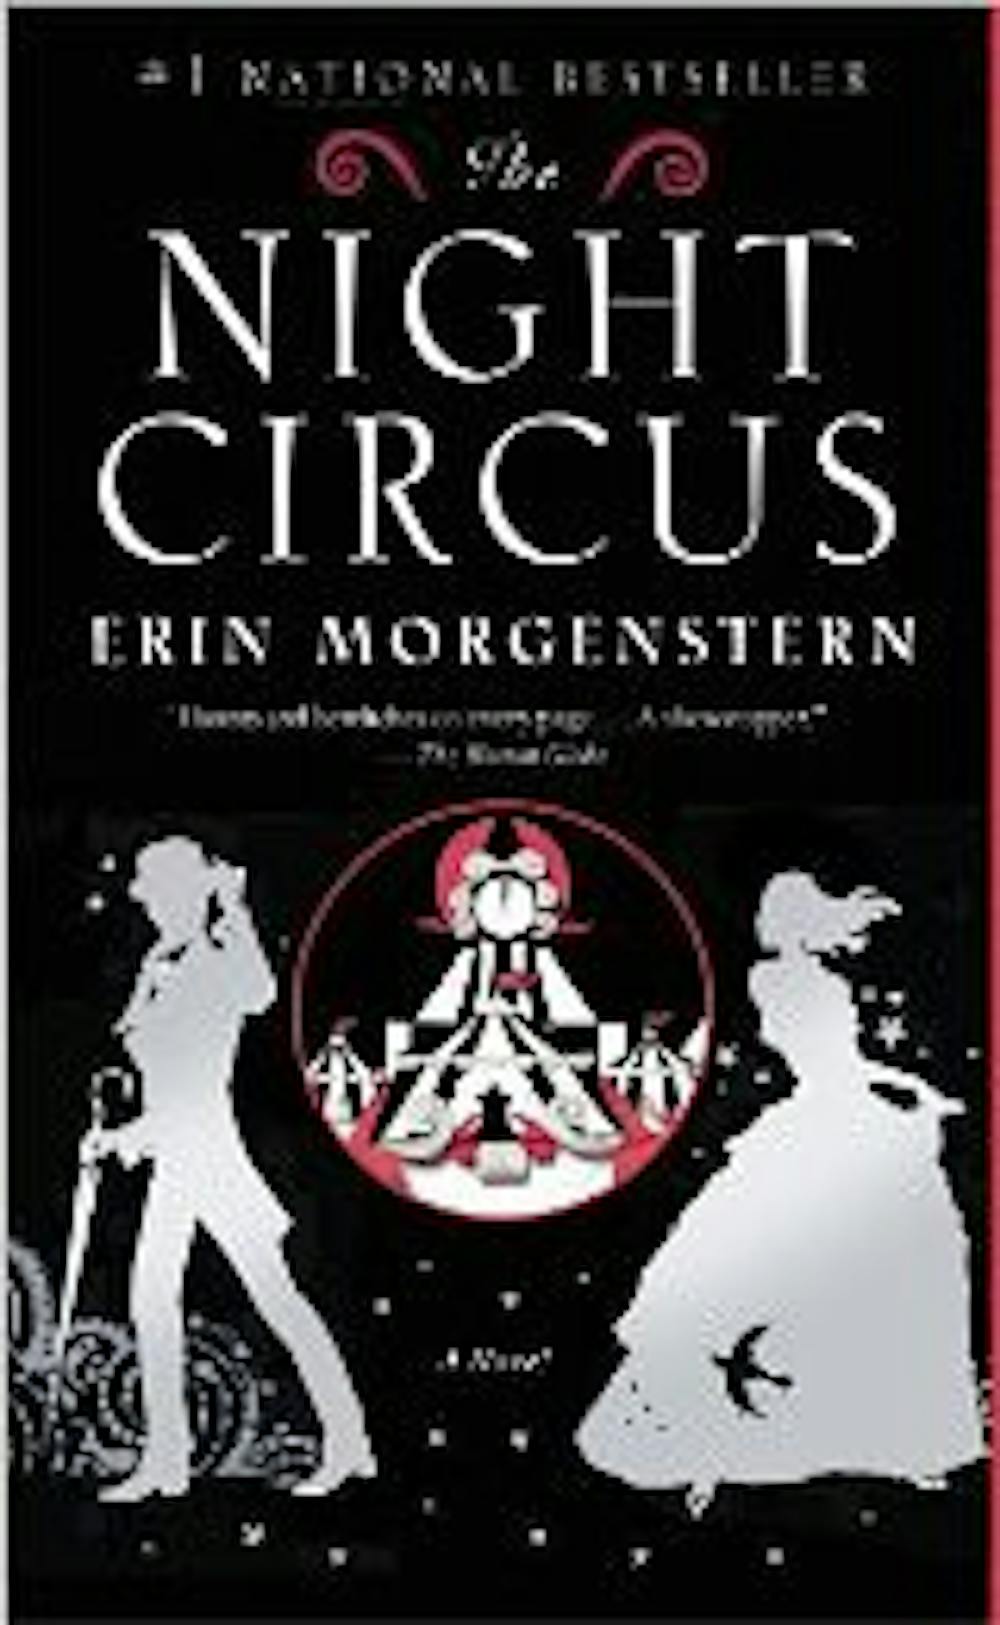 Morgenstern’s ‘The Night Circus’ full of romances